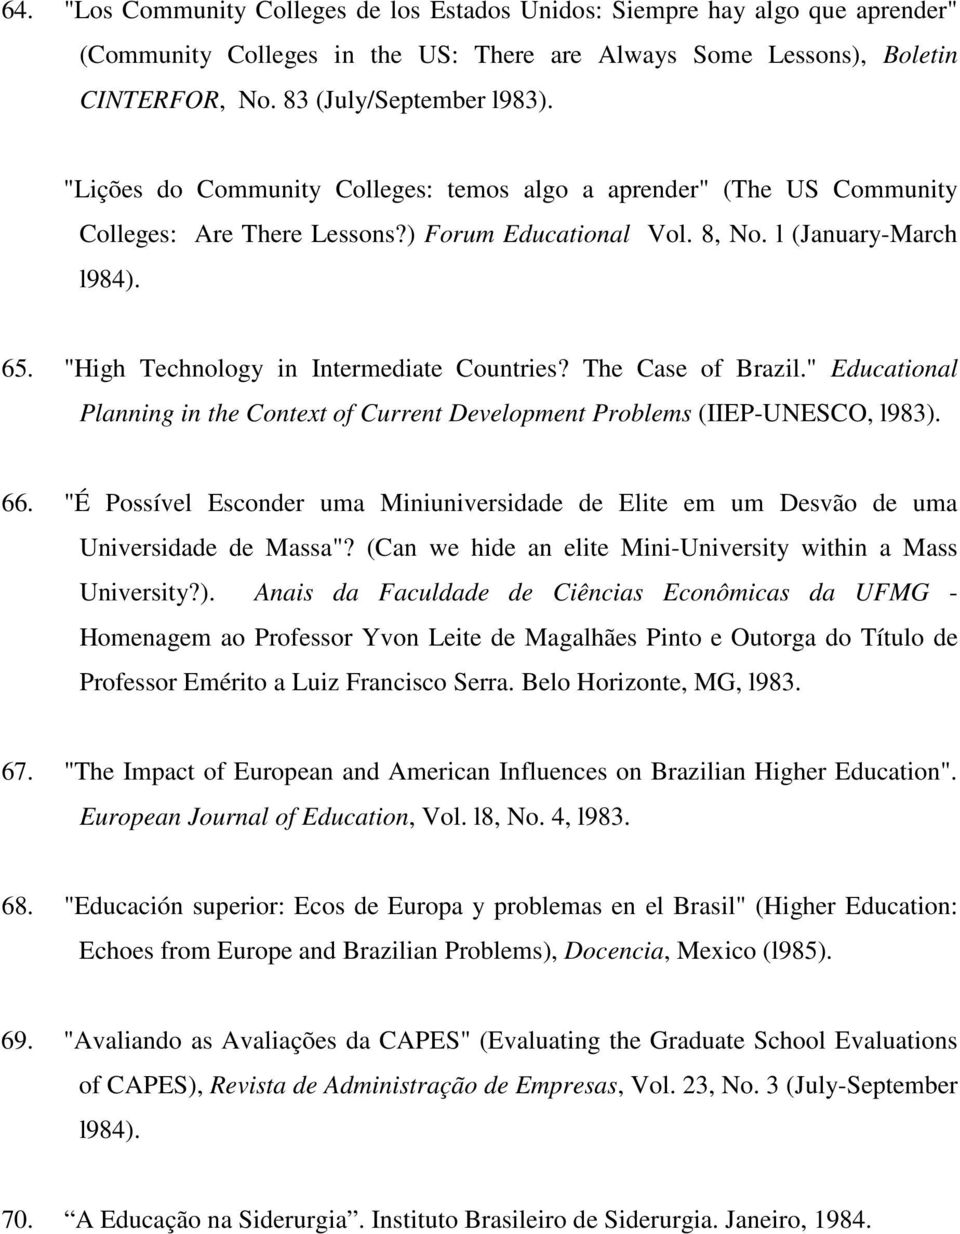 "High Technology in Intermediate Countries? The Case of Brazil." Educational Planning in the Context of Current Development Problems (IIEP-UNESCO, l983). 66.